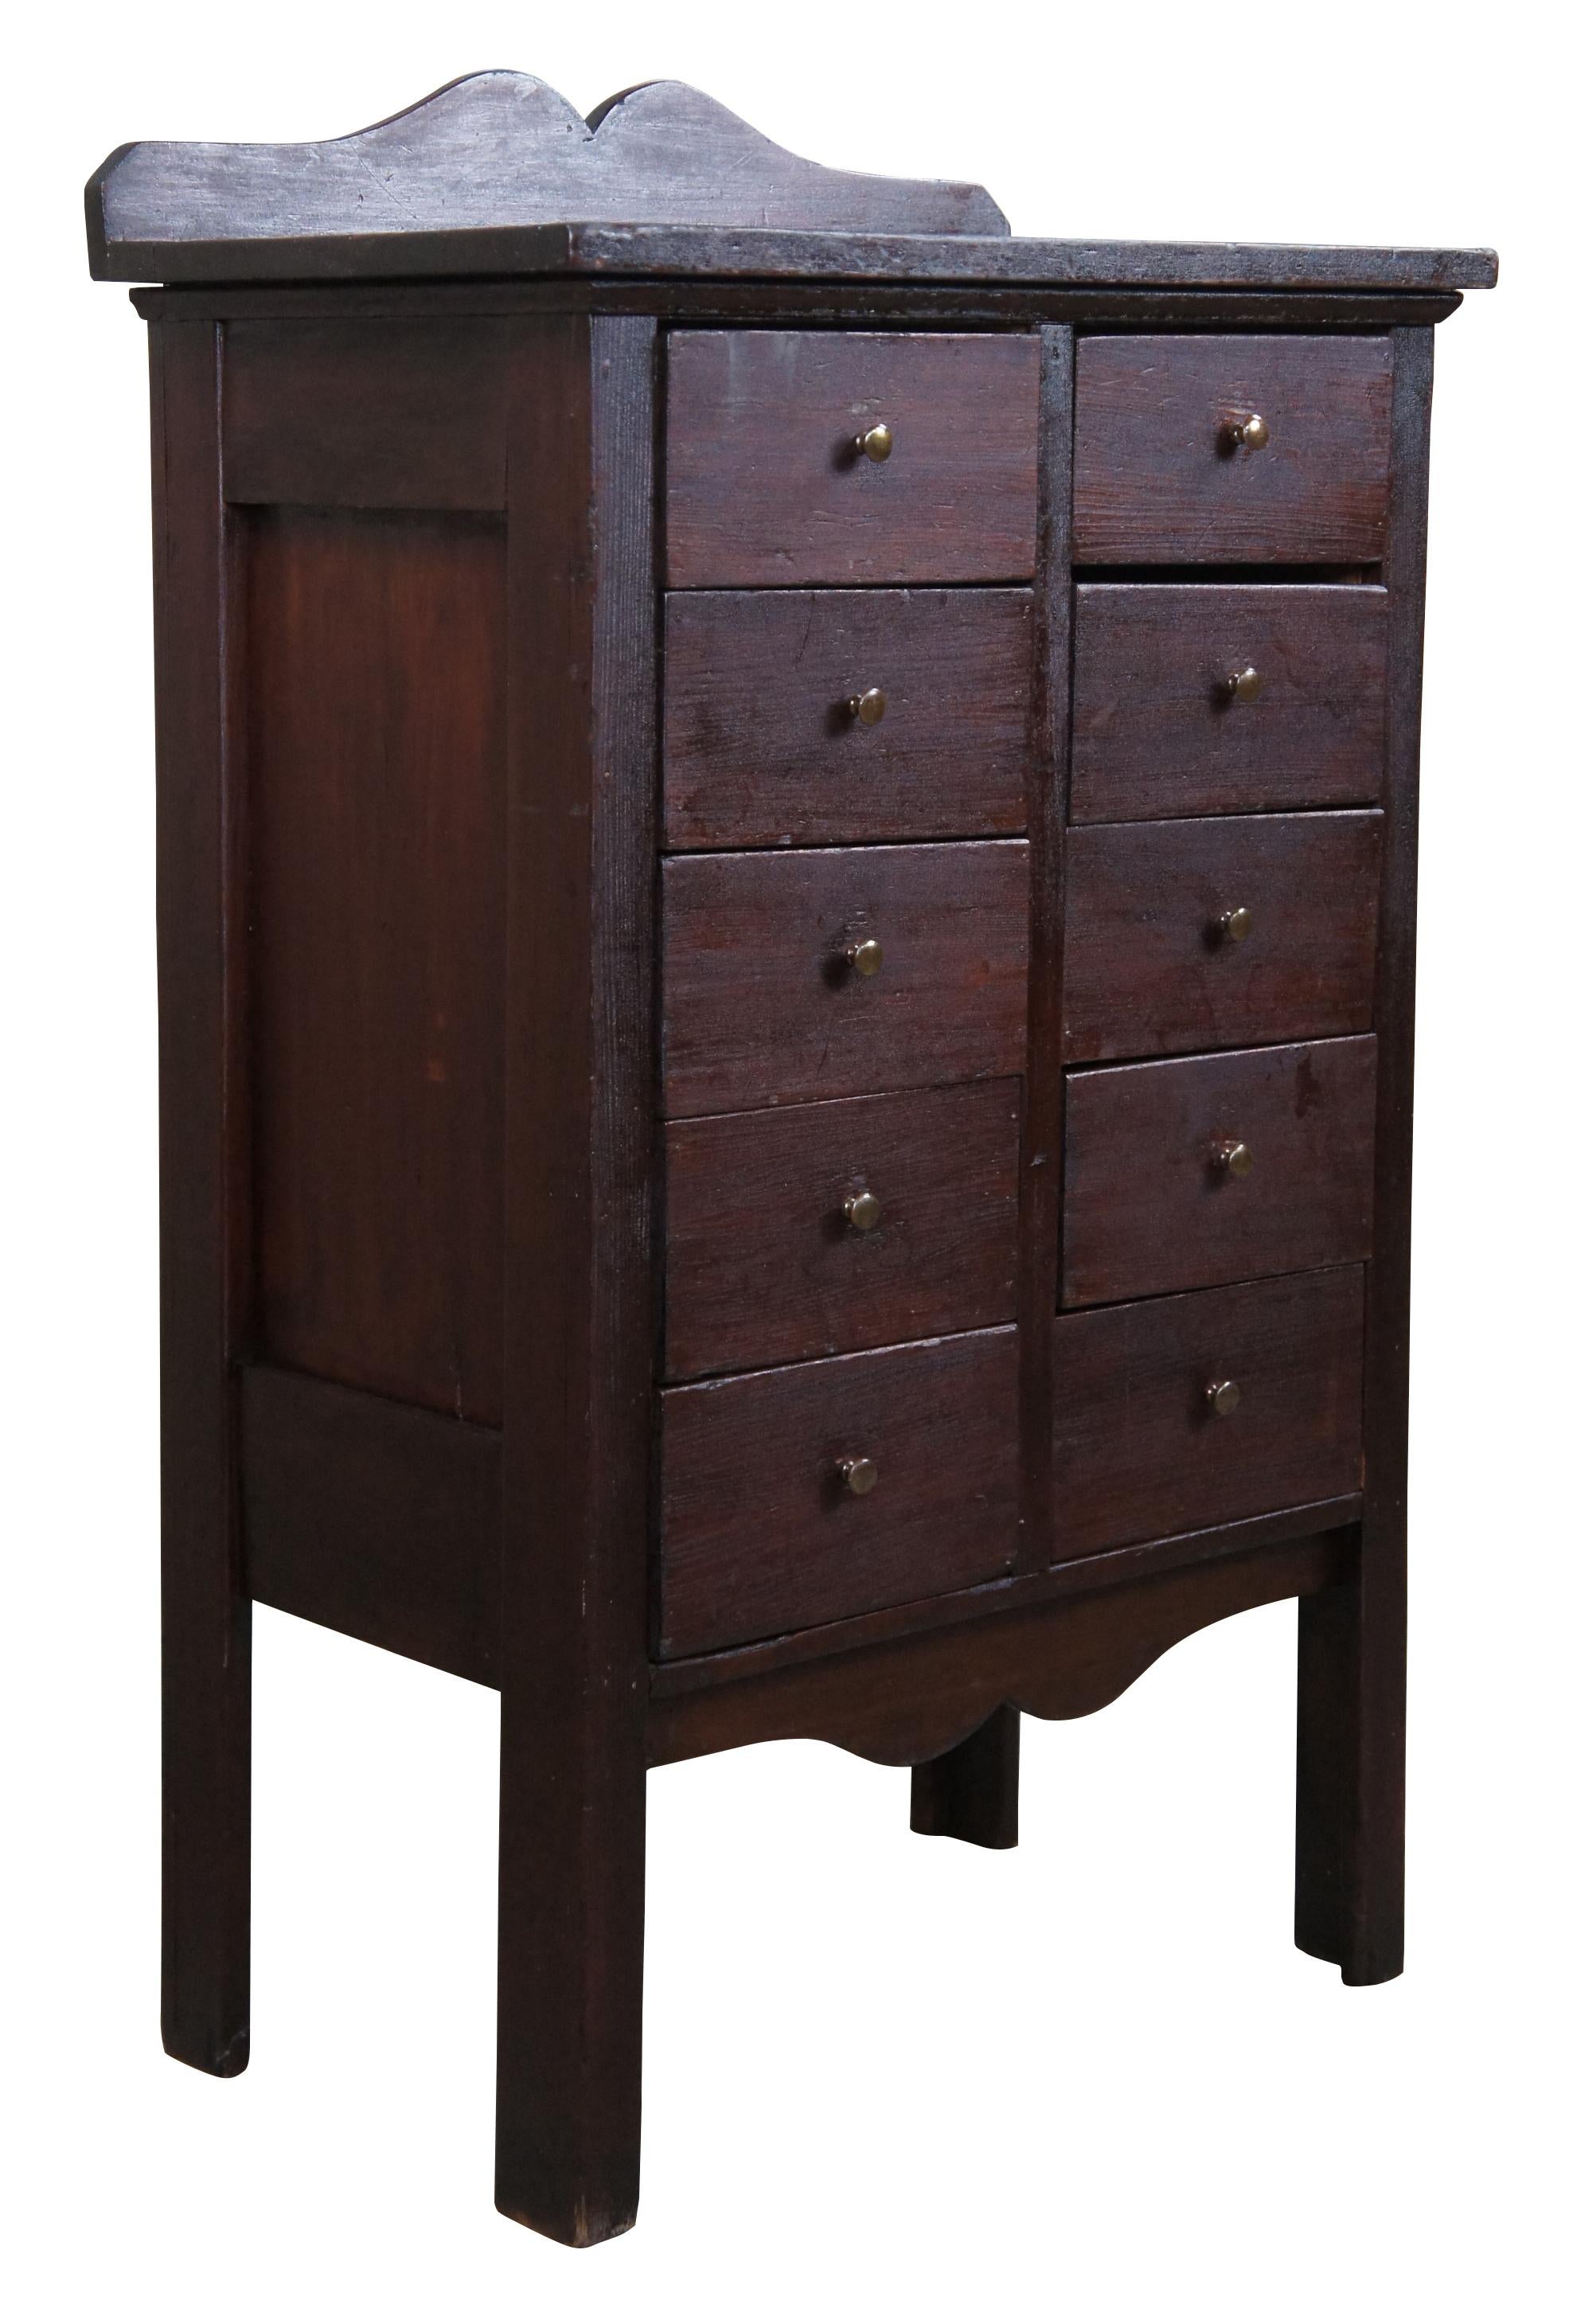 Vintage Apothecary cabinet or chest, circa 1940s. Made from pine with a mahogany color stain. Features a rectangular form with serpentine cut aprons and ten drawers with brass knobs. 

Measures: 18.5